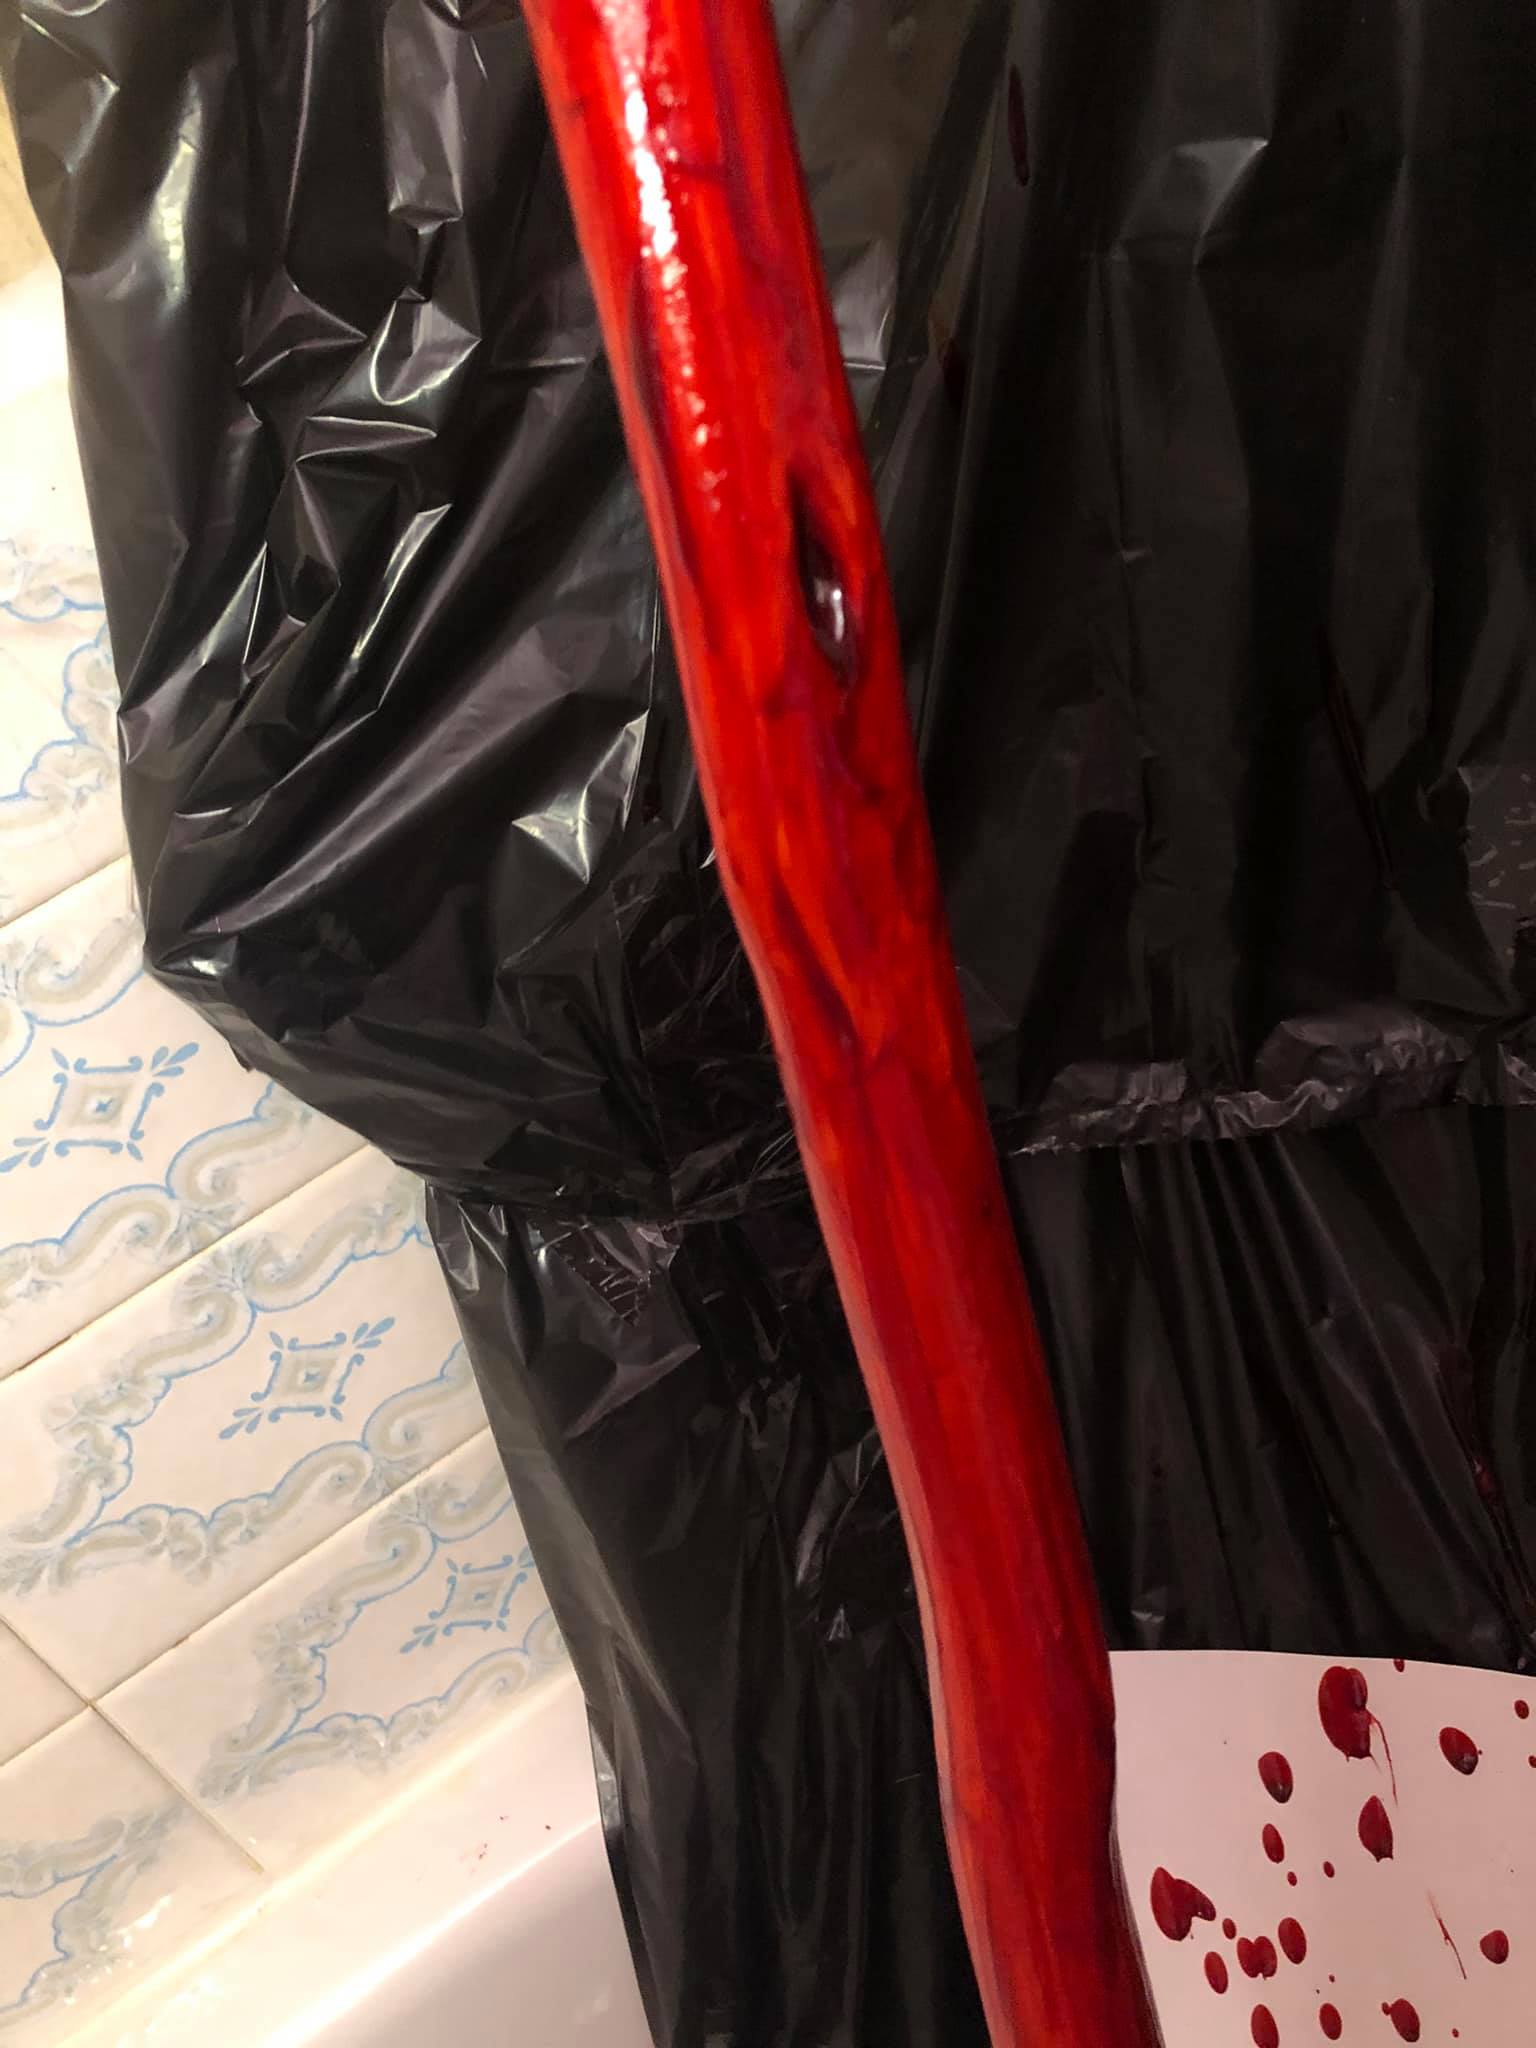 The bloody staff, with droplets at the bottom.